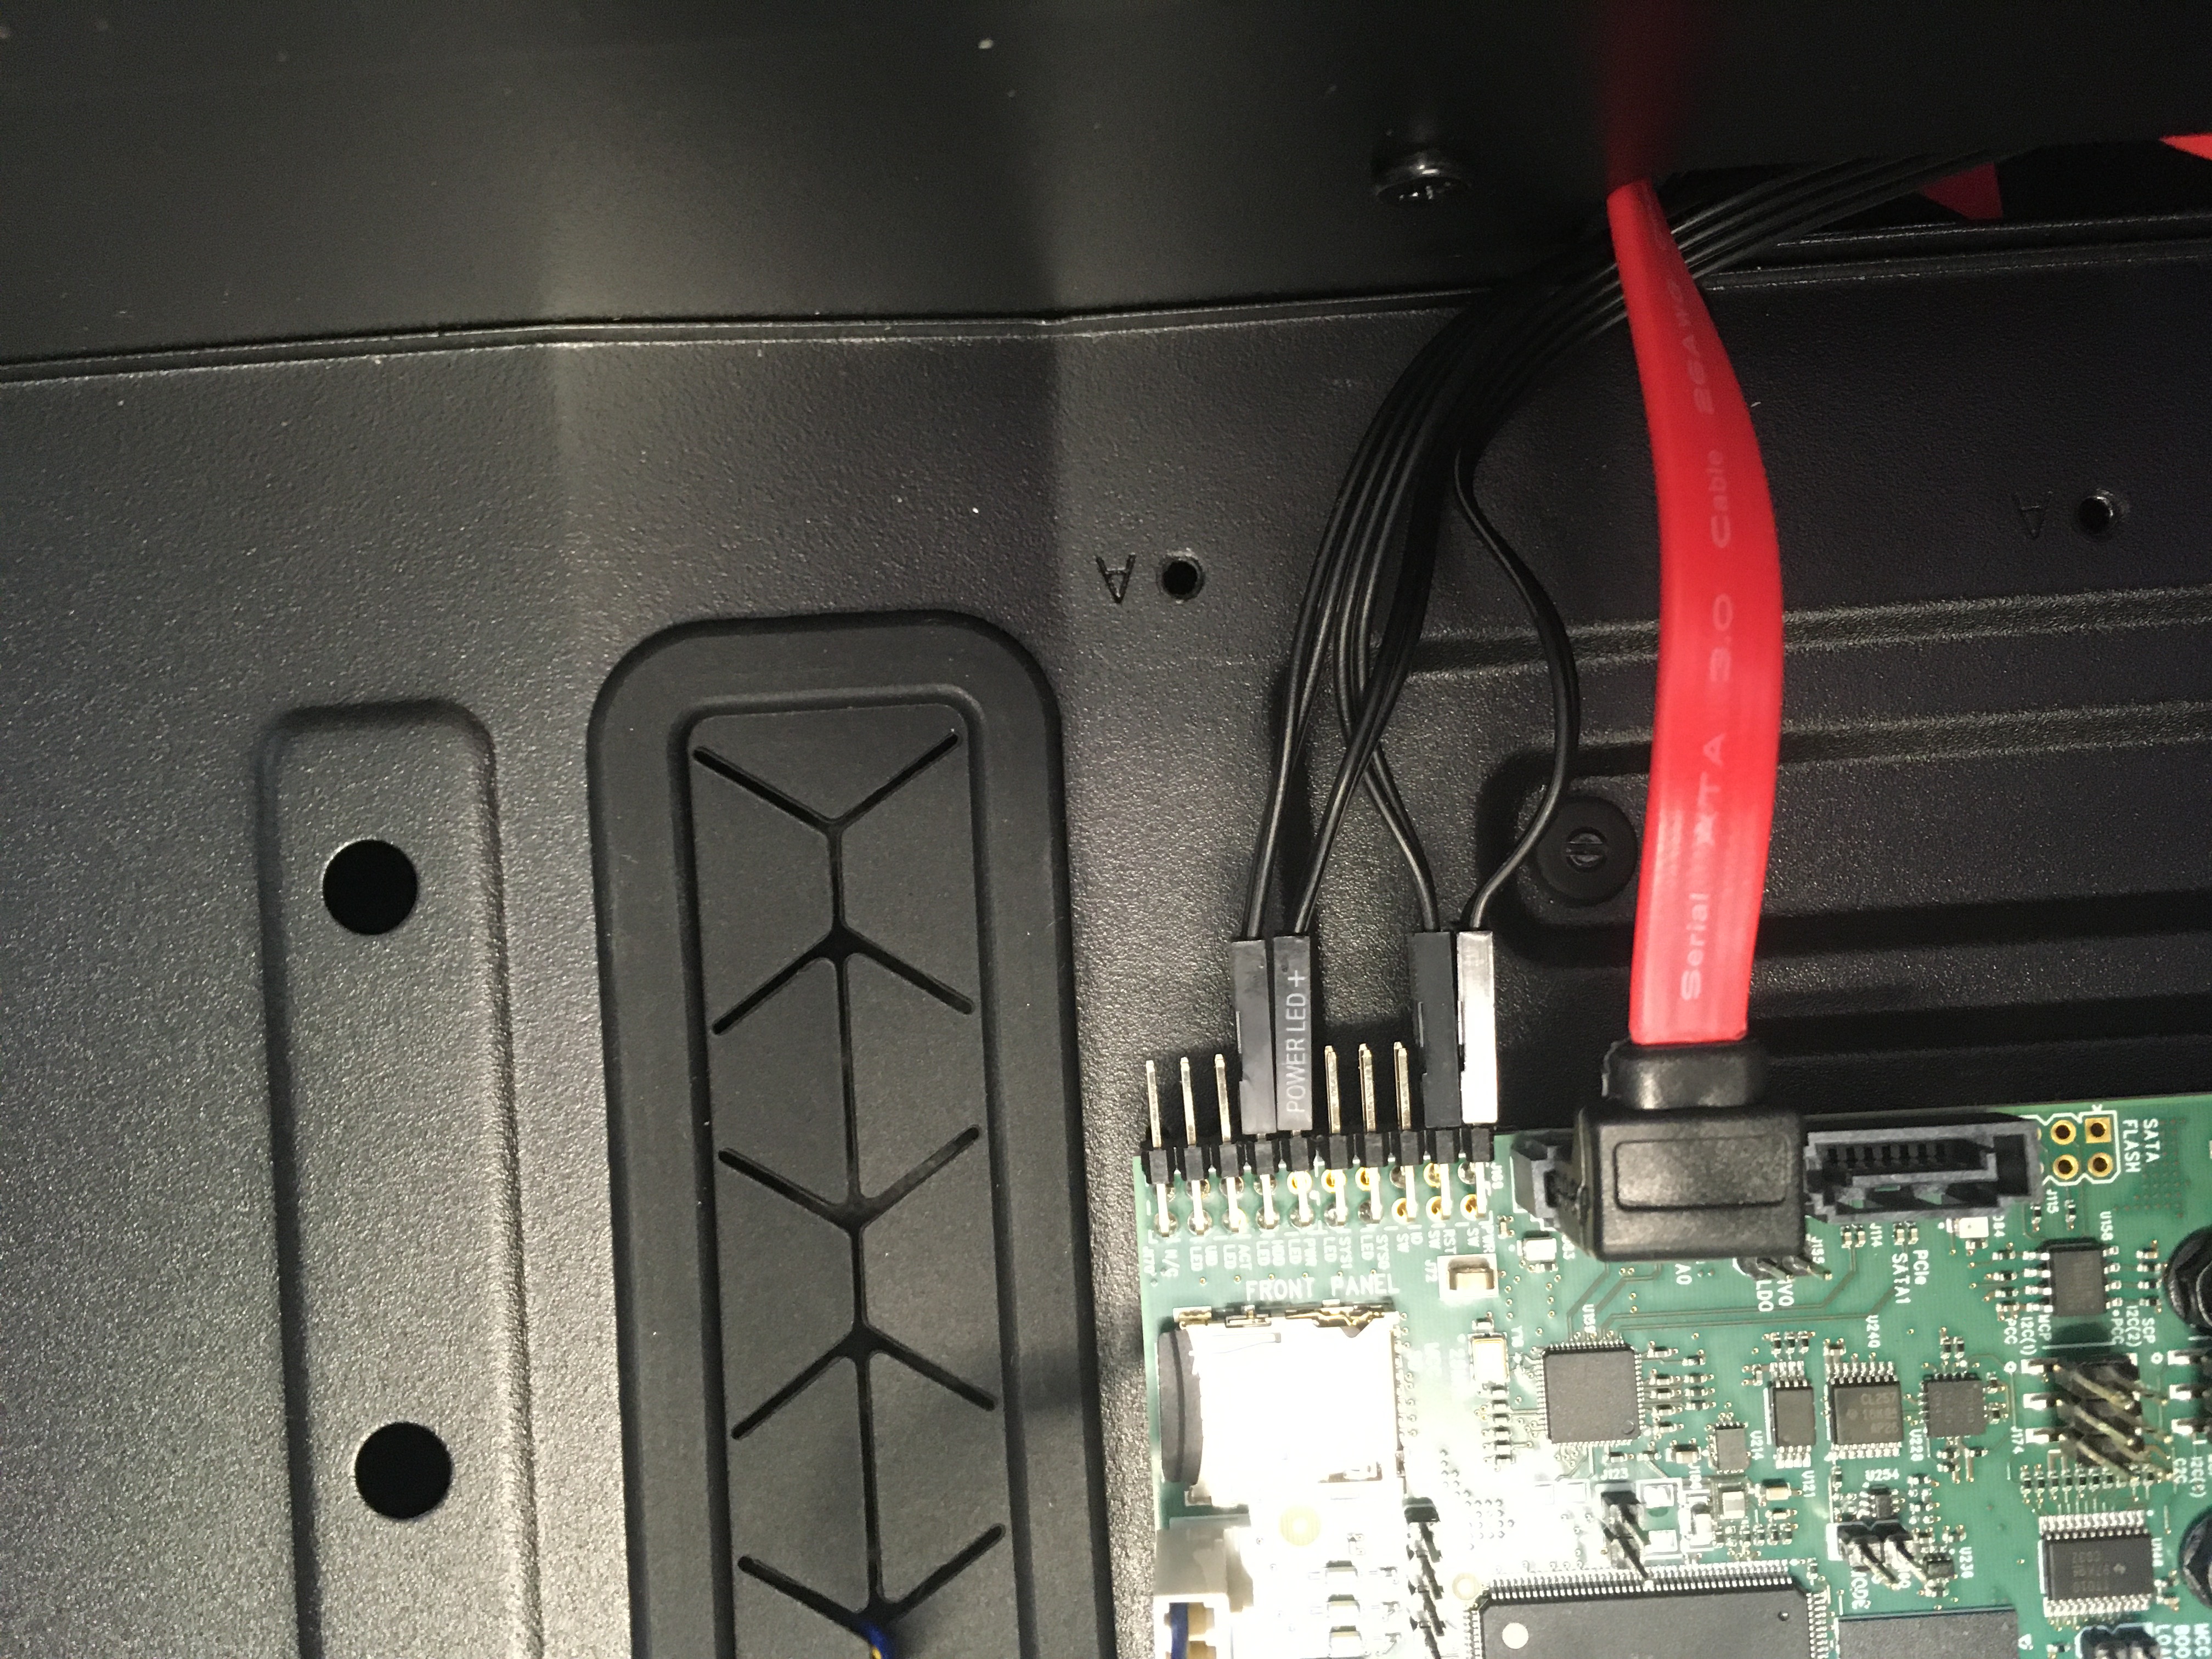 Close-up of edge connectors from motherboard to front panel